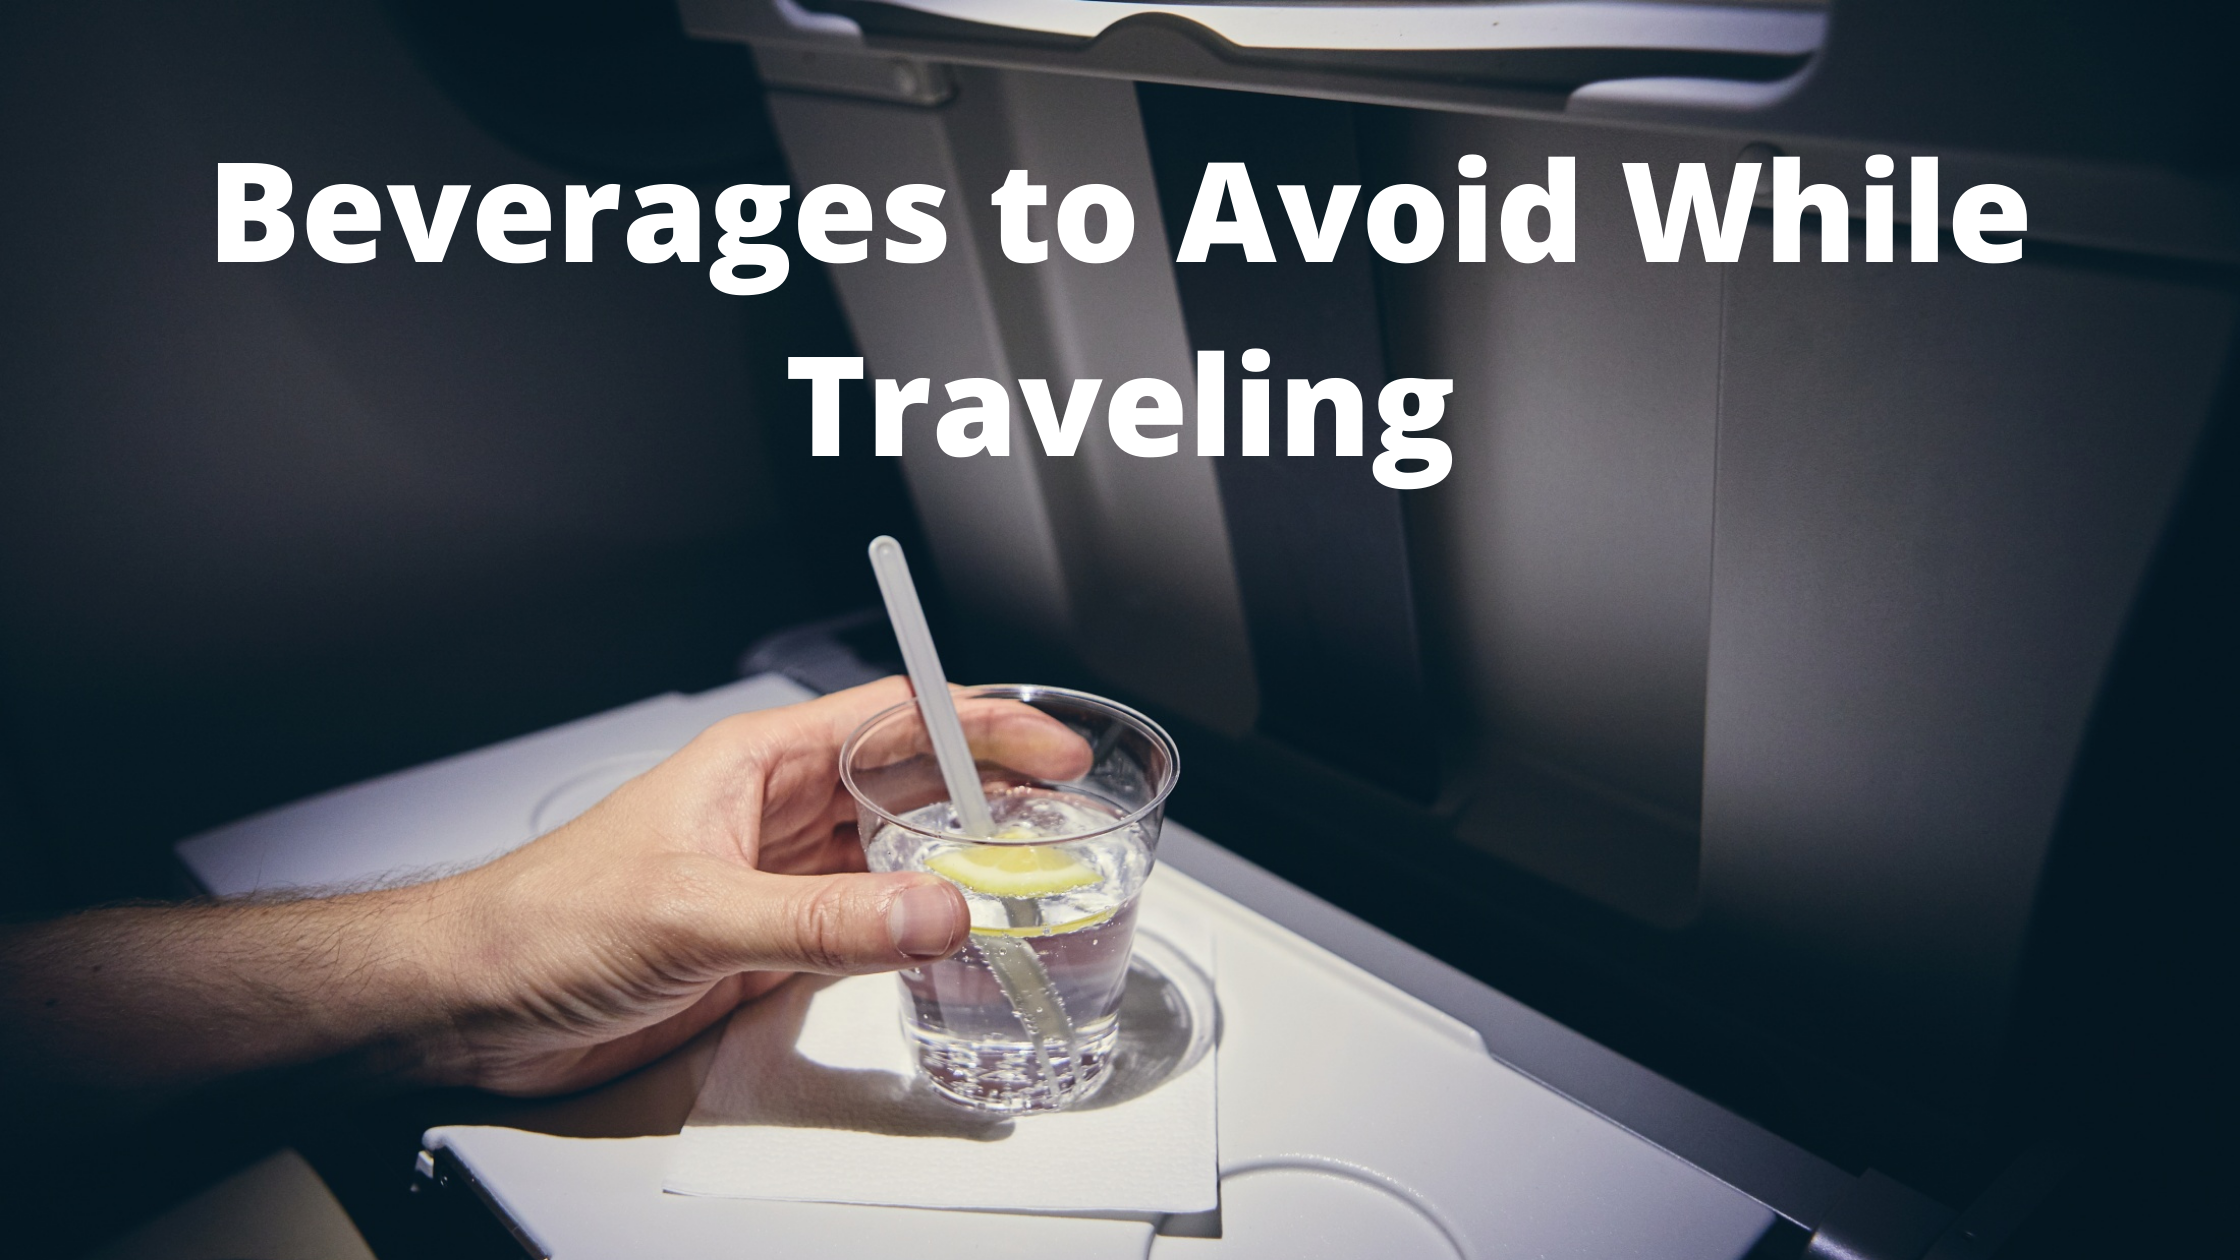 Beverages to Avoid While Traveling